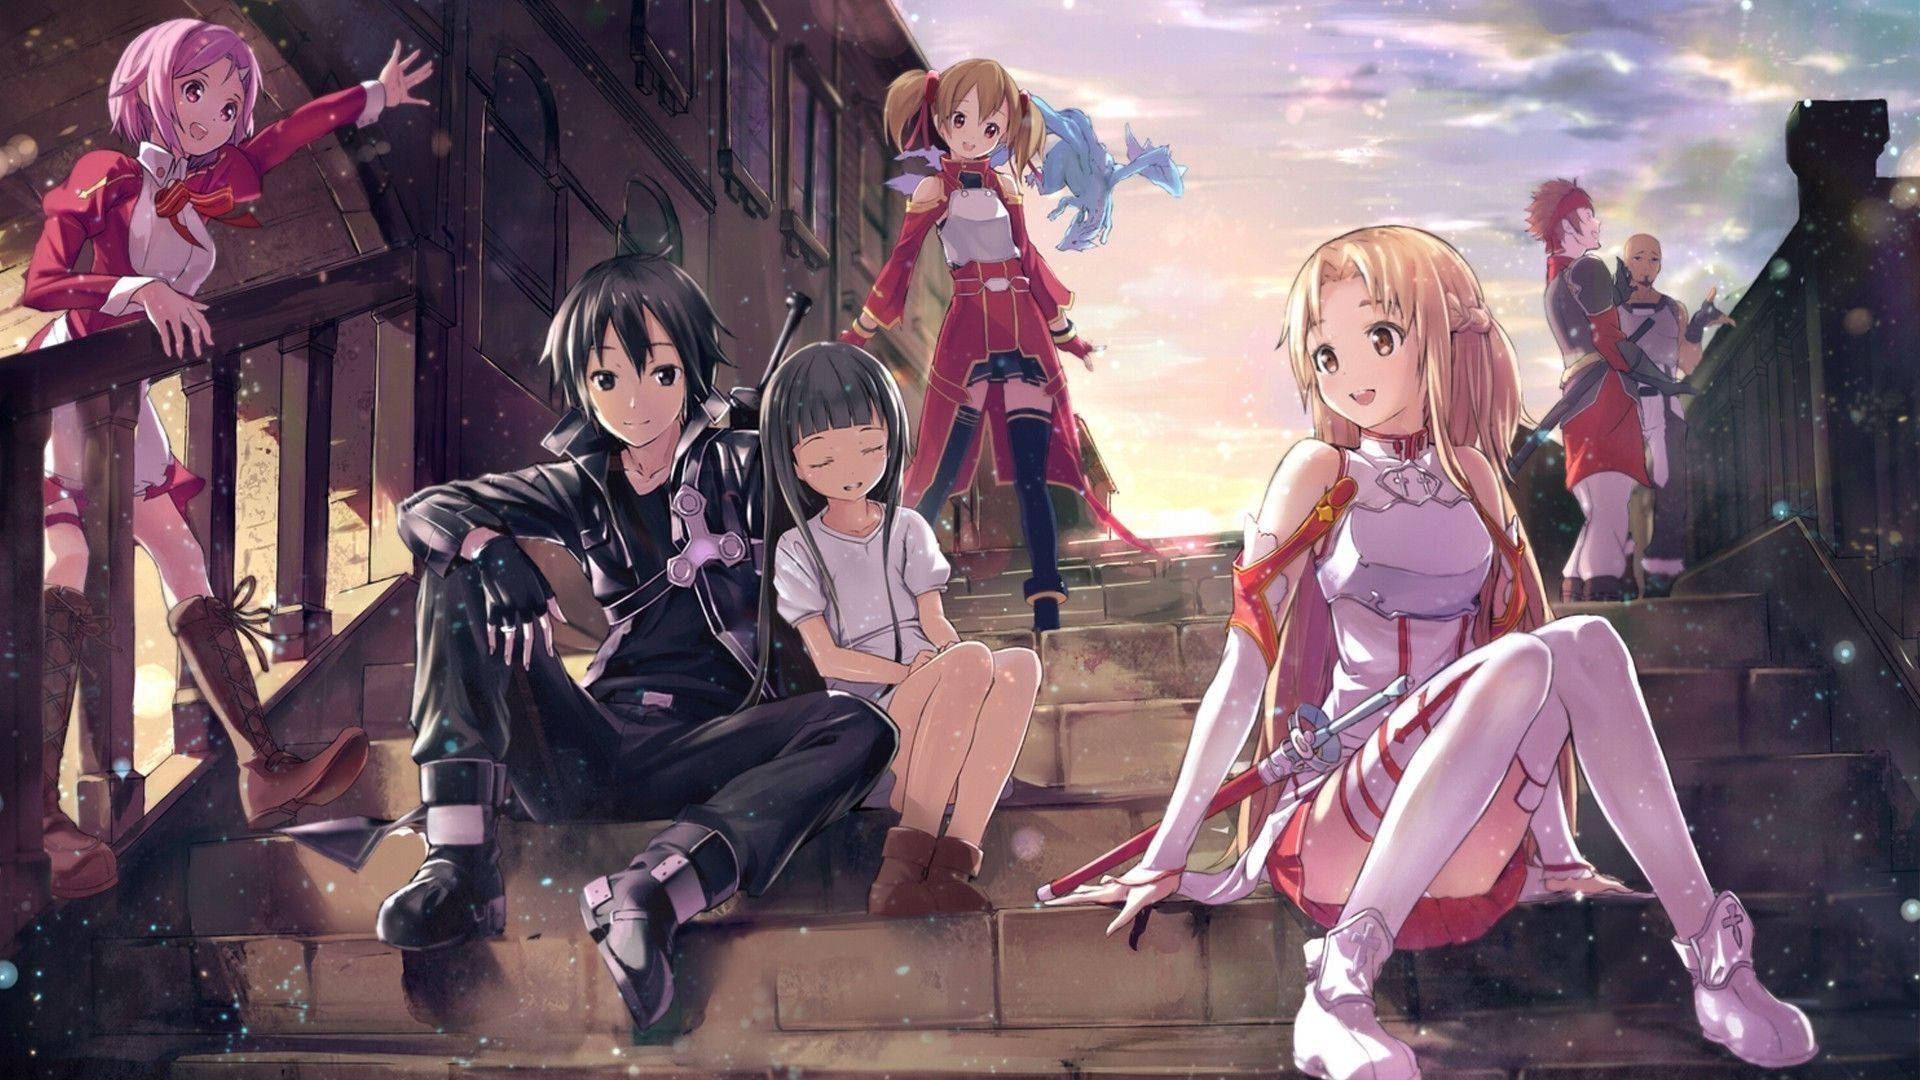 Three members of the SAO cast pose on a set of stairs Wallpaper